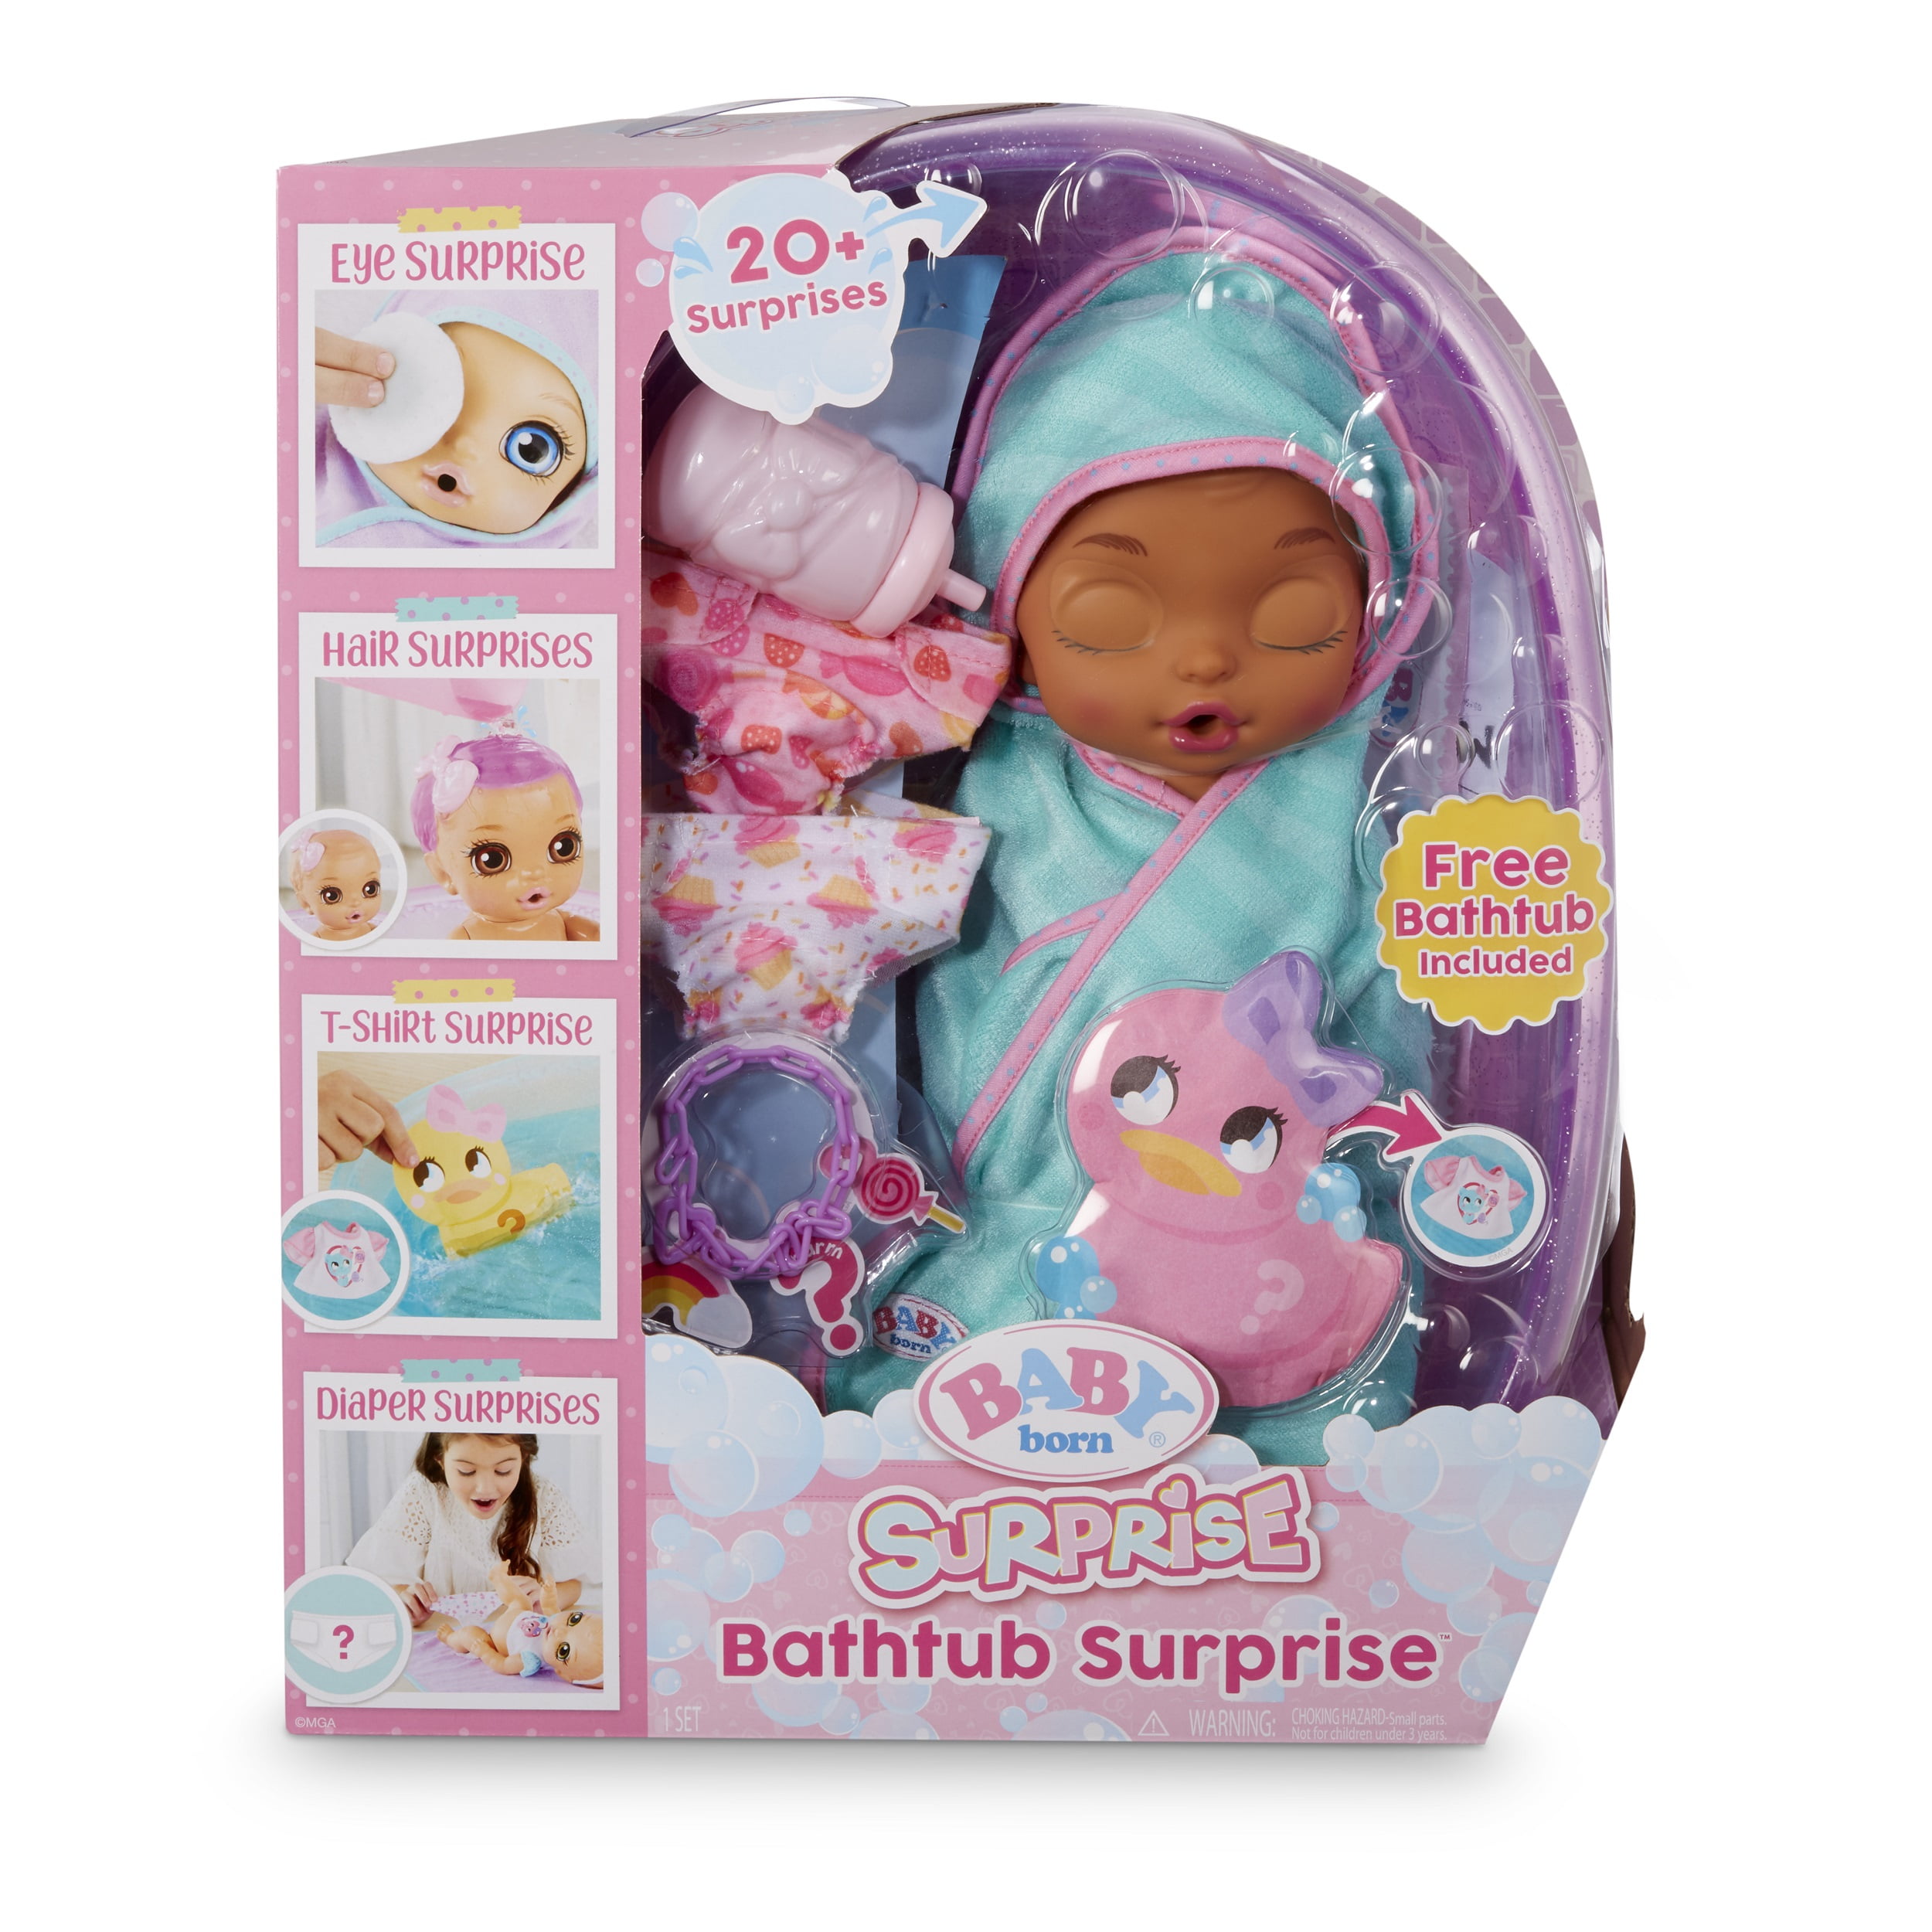 where can i buy baby born surprise